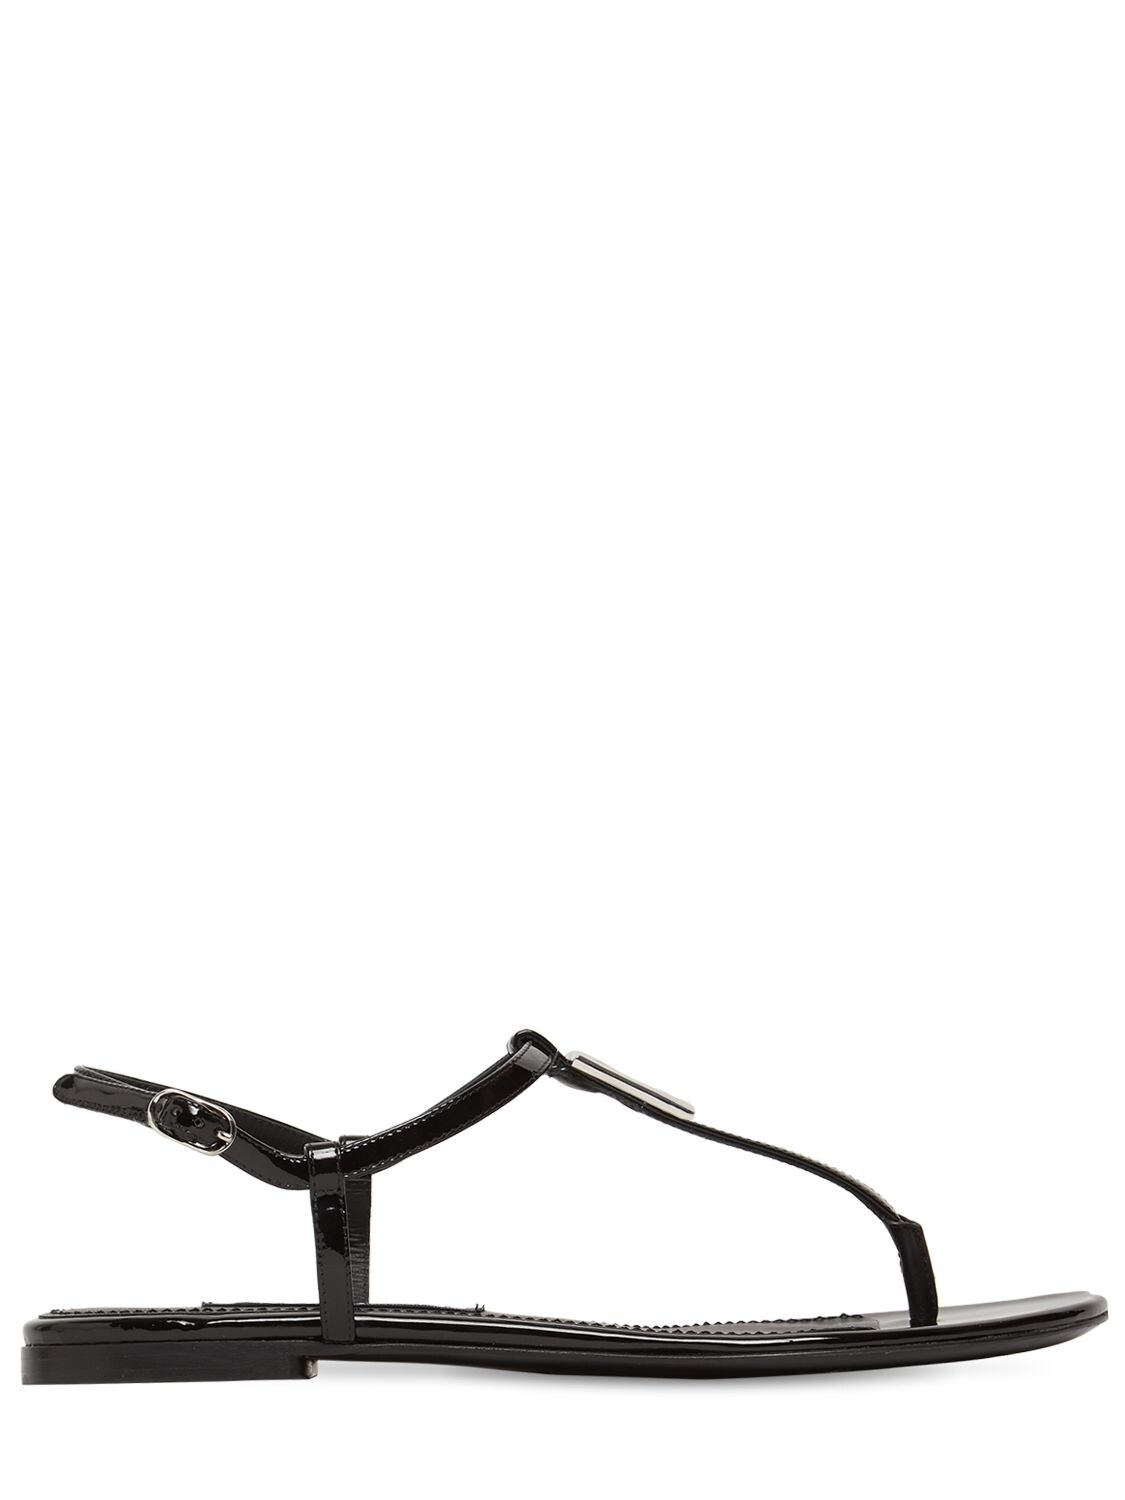 DOLCE & GABBANA 10MM PATENT LEATHER THONG SANDALS